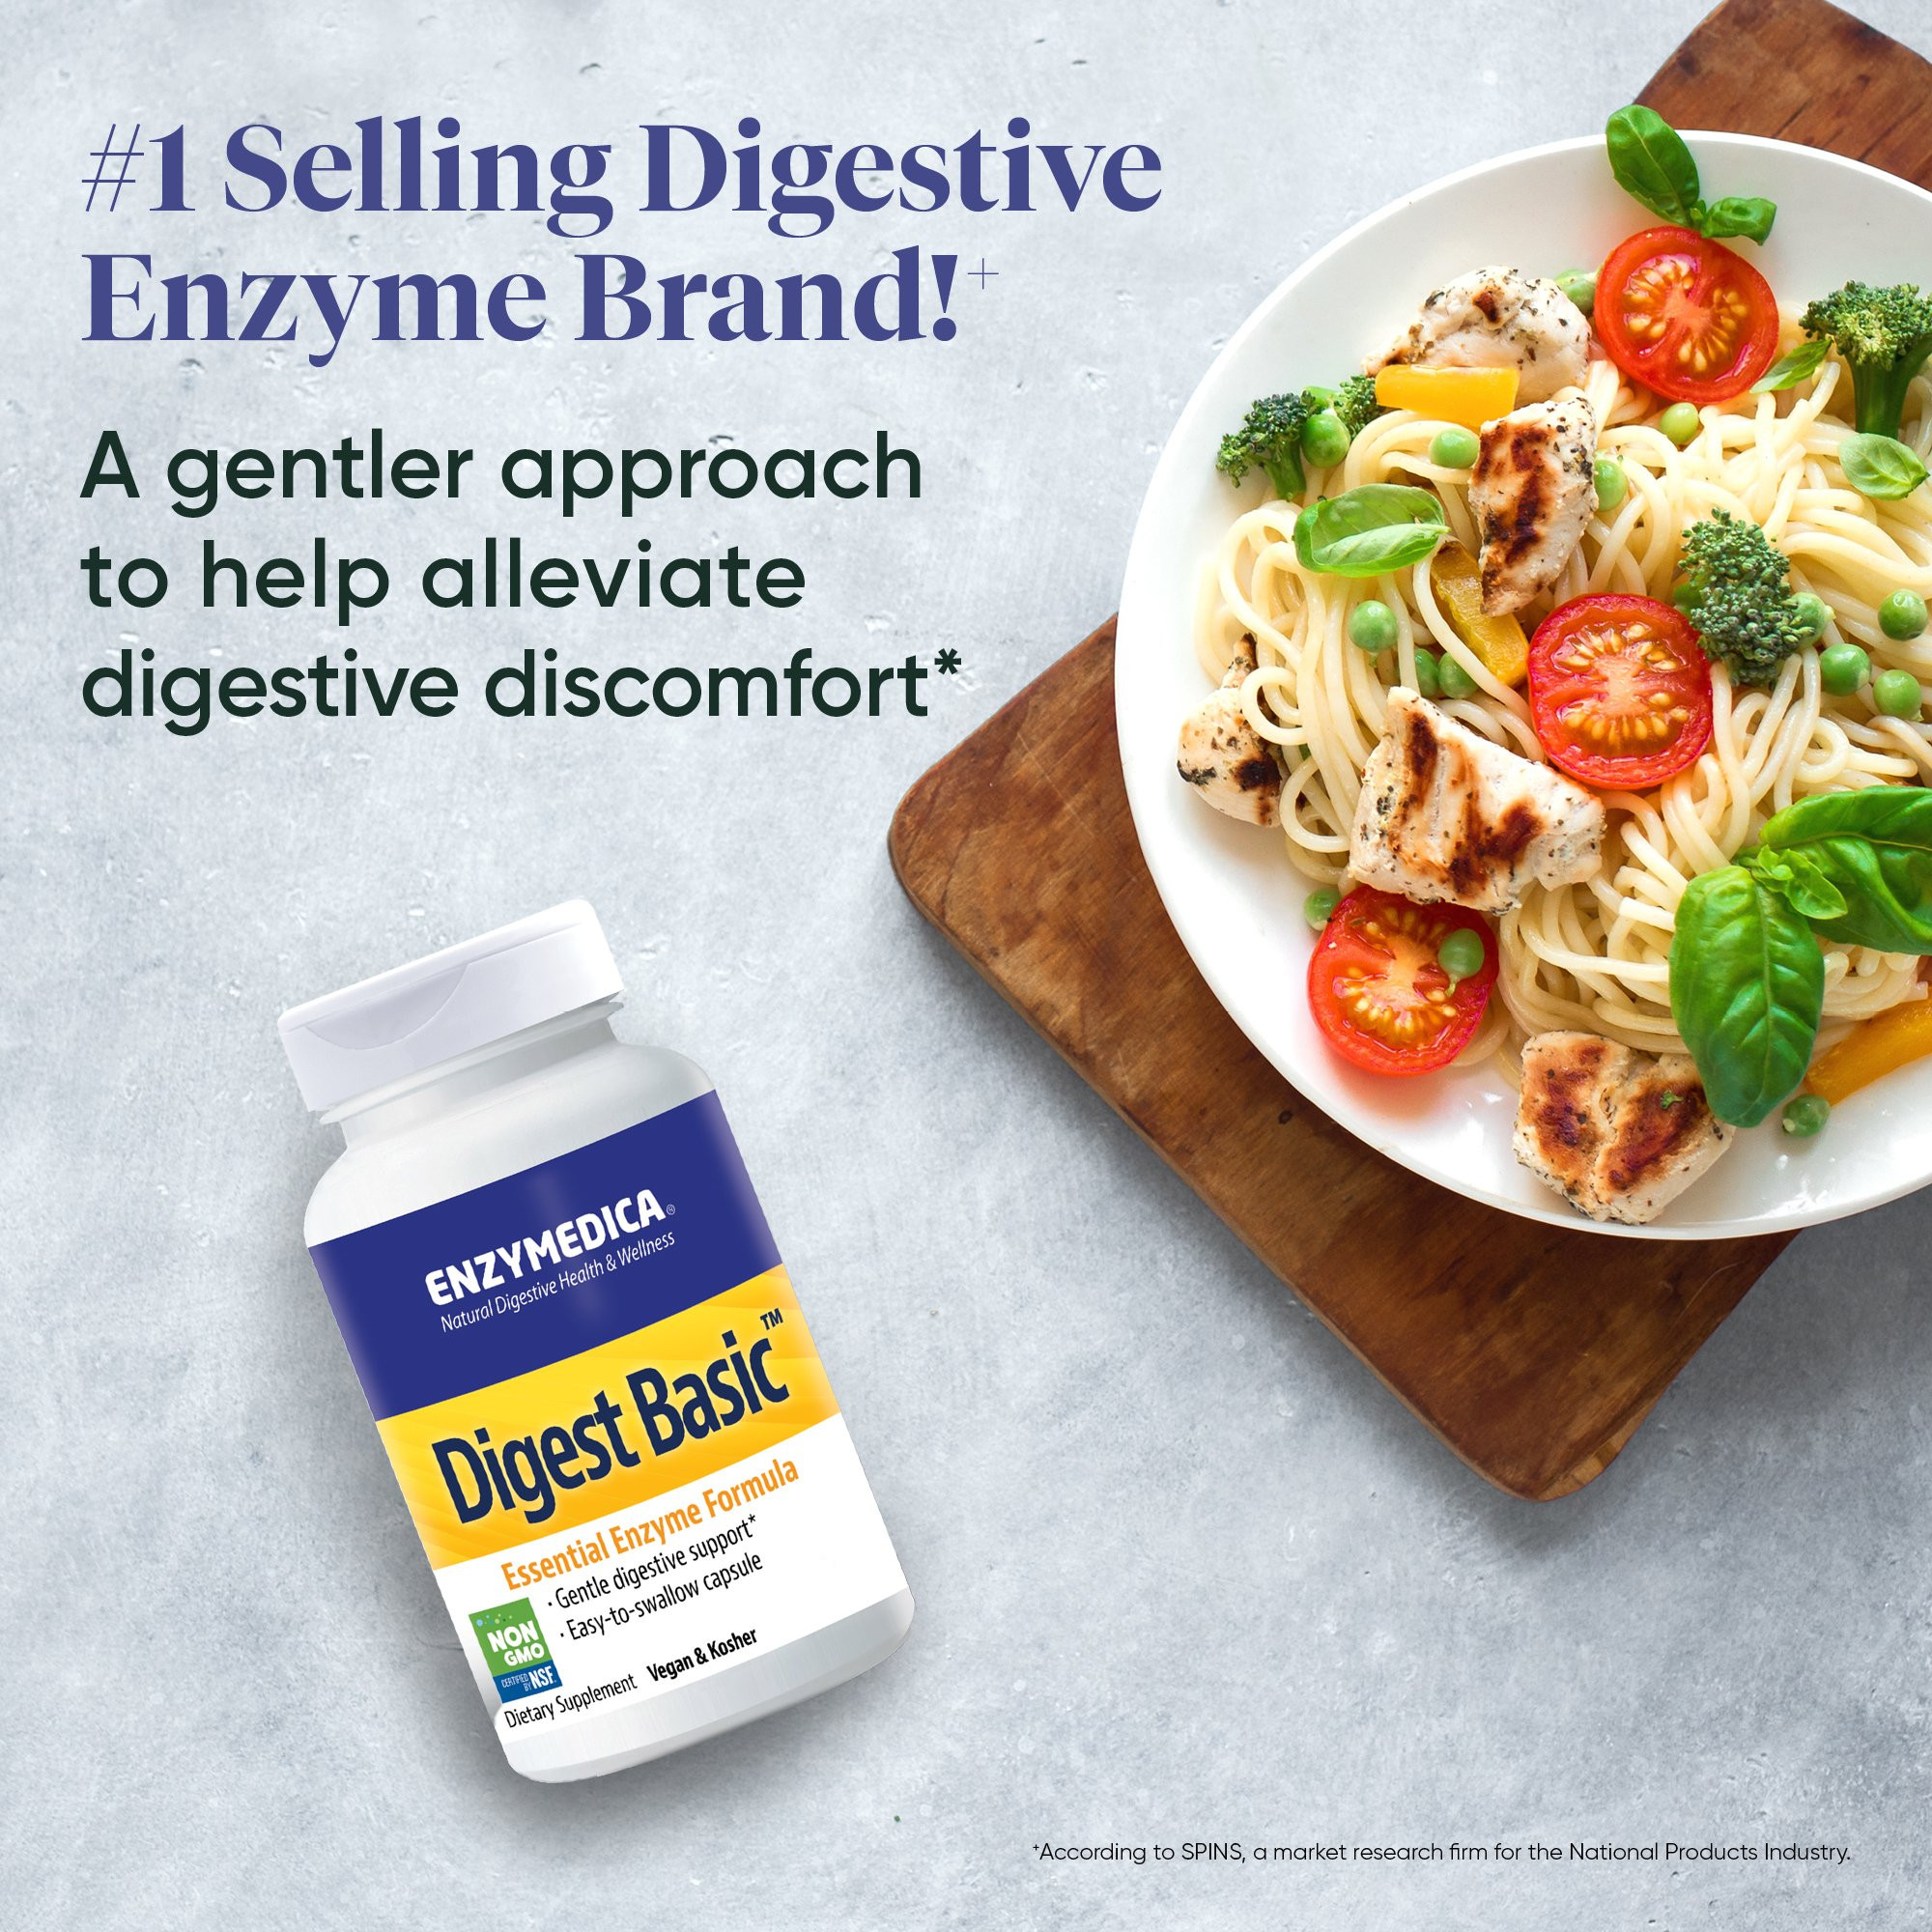 Friska Reviews: Are These Digestive Enzymes Right For You